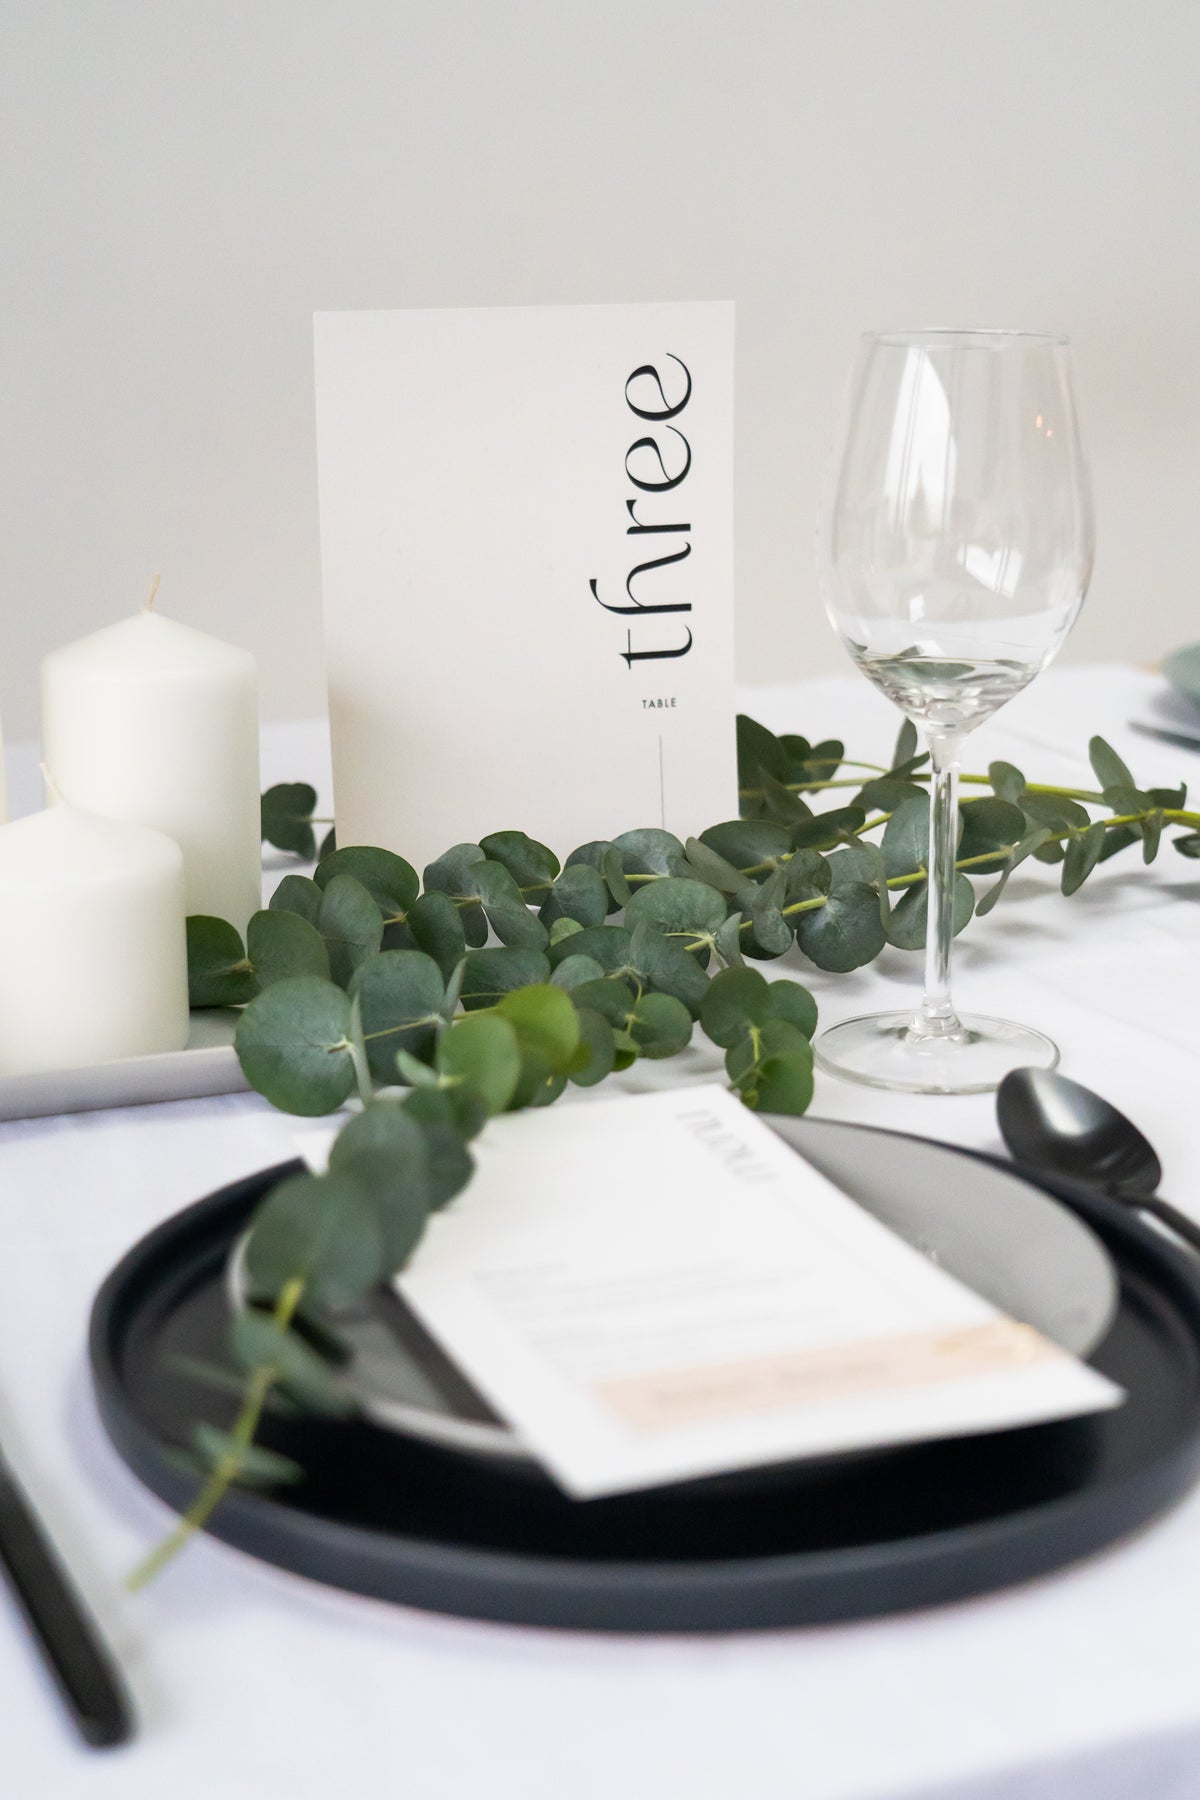 The Modern Table Numbers